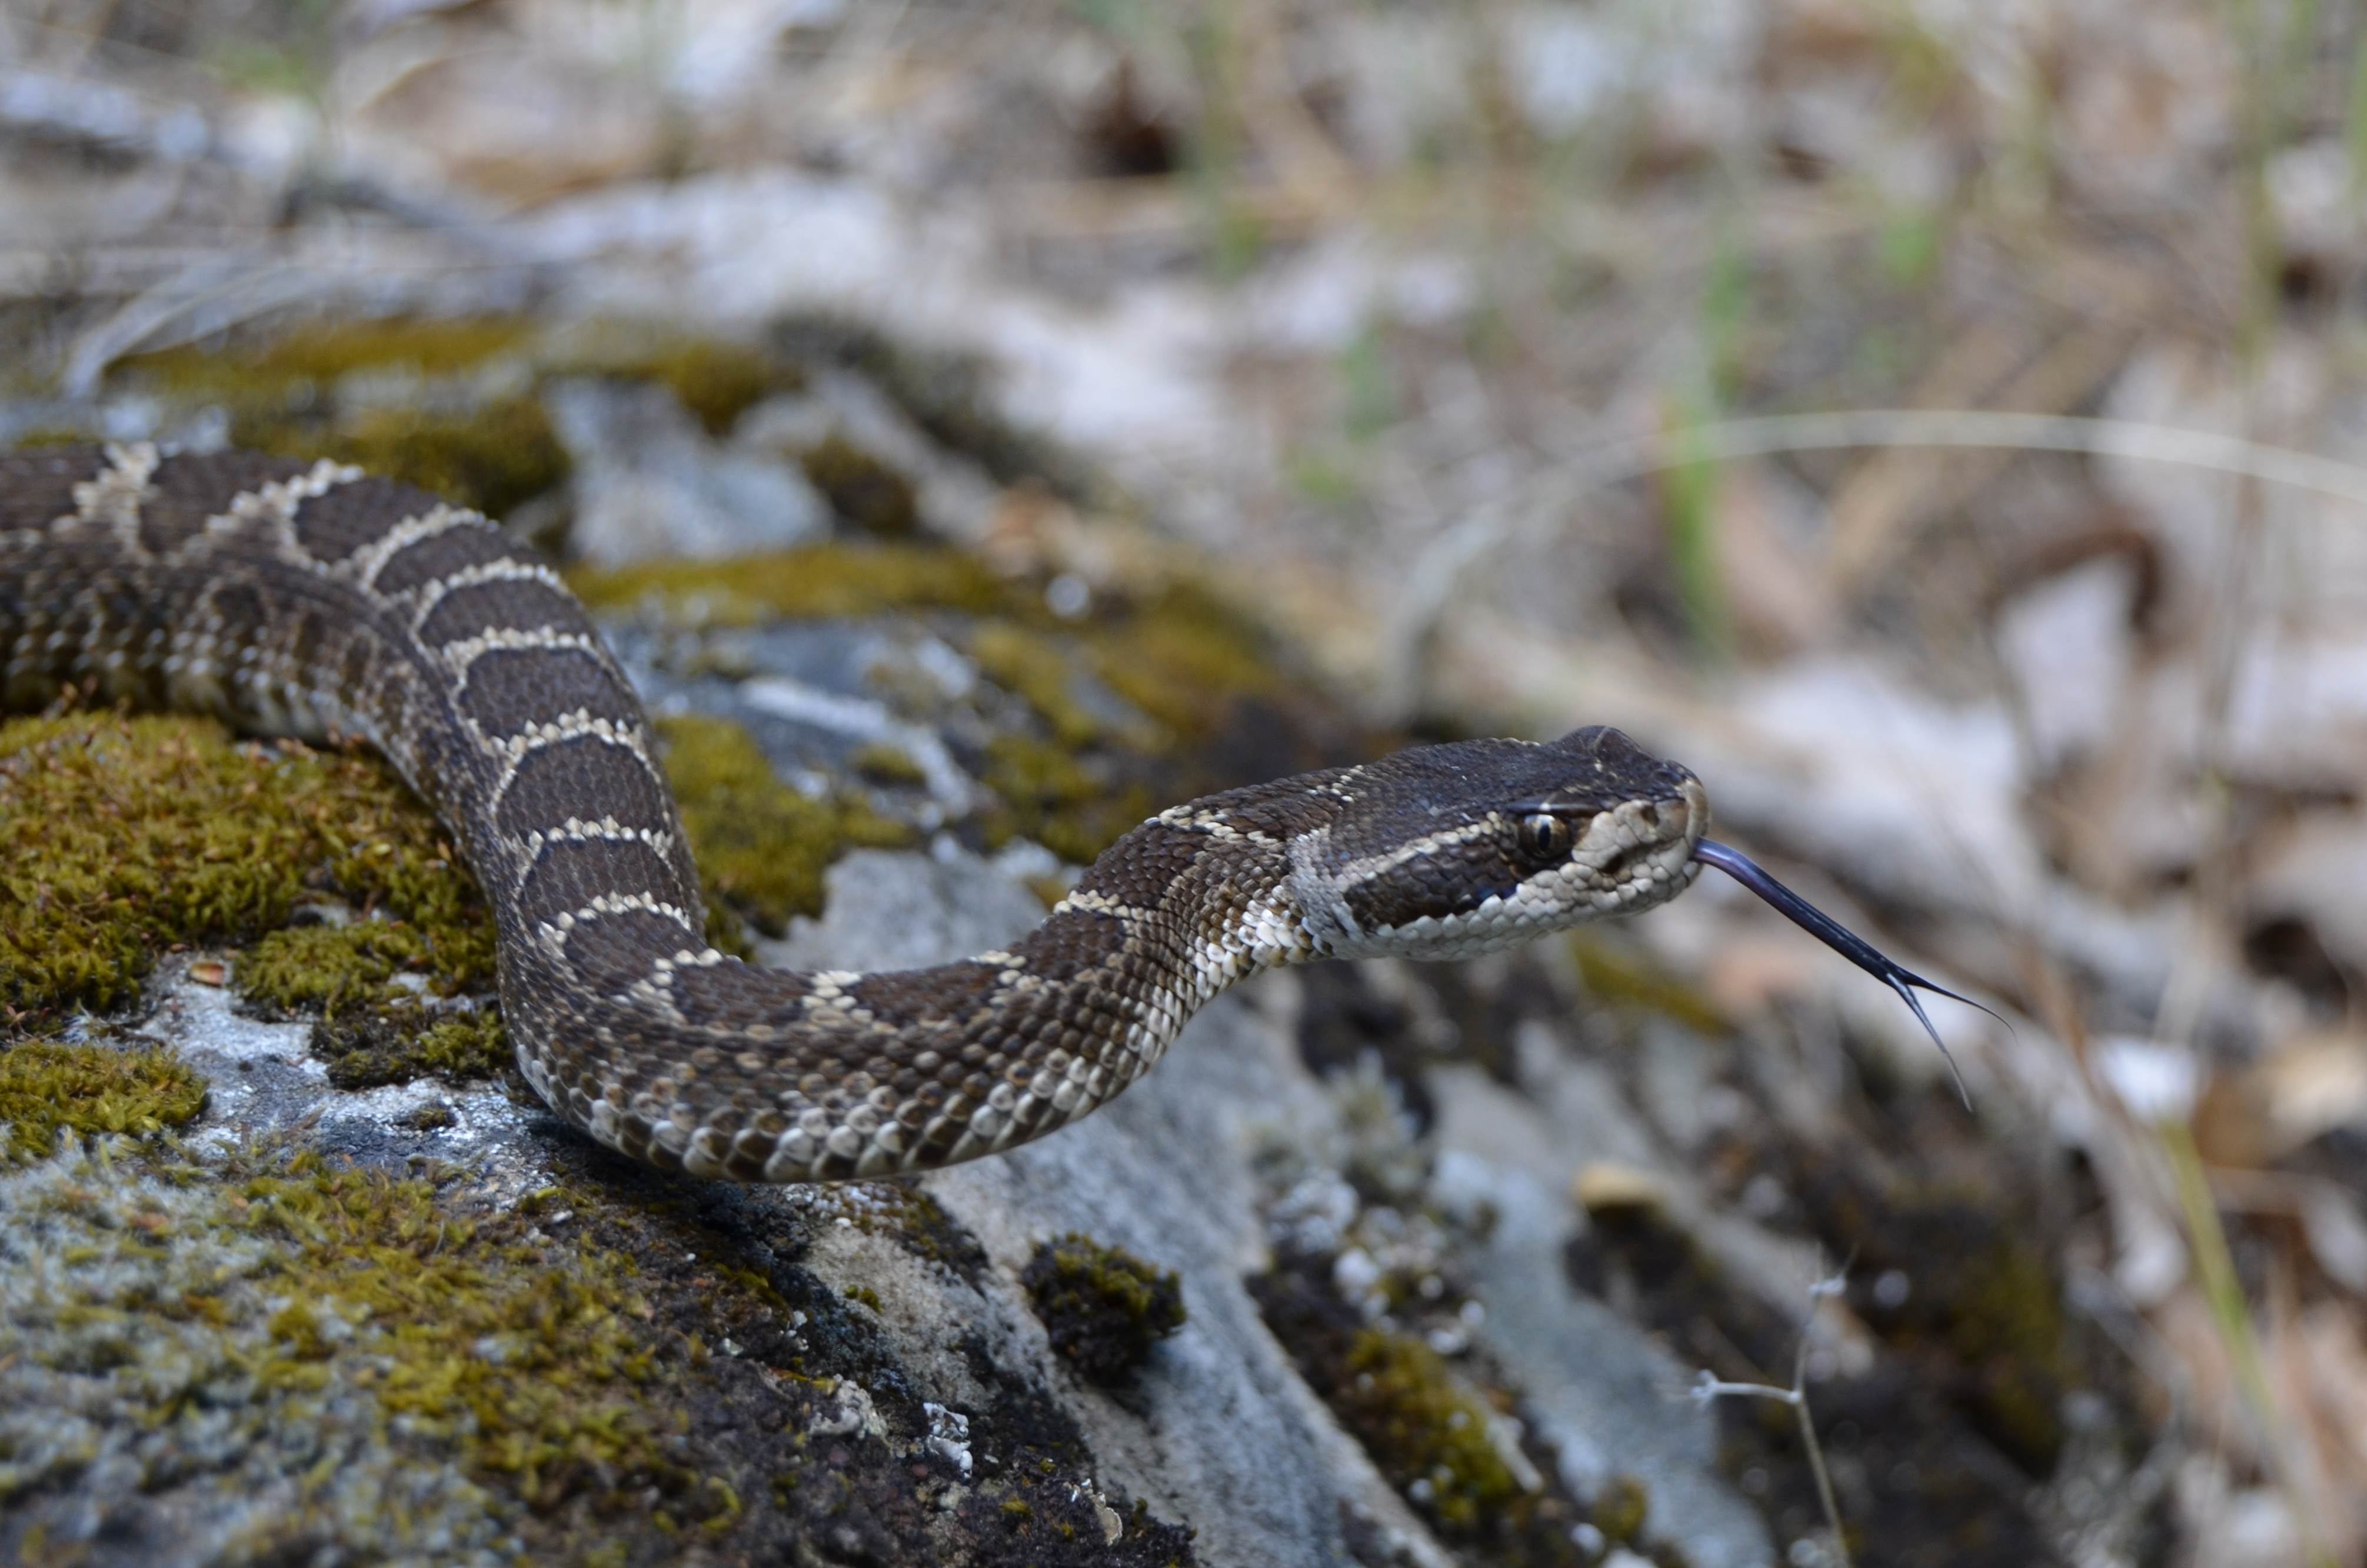 Southern Pac Rattler